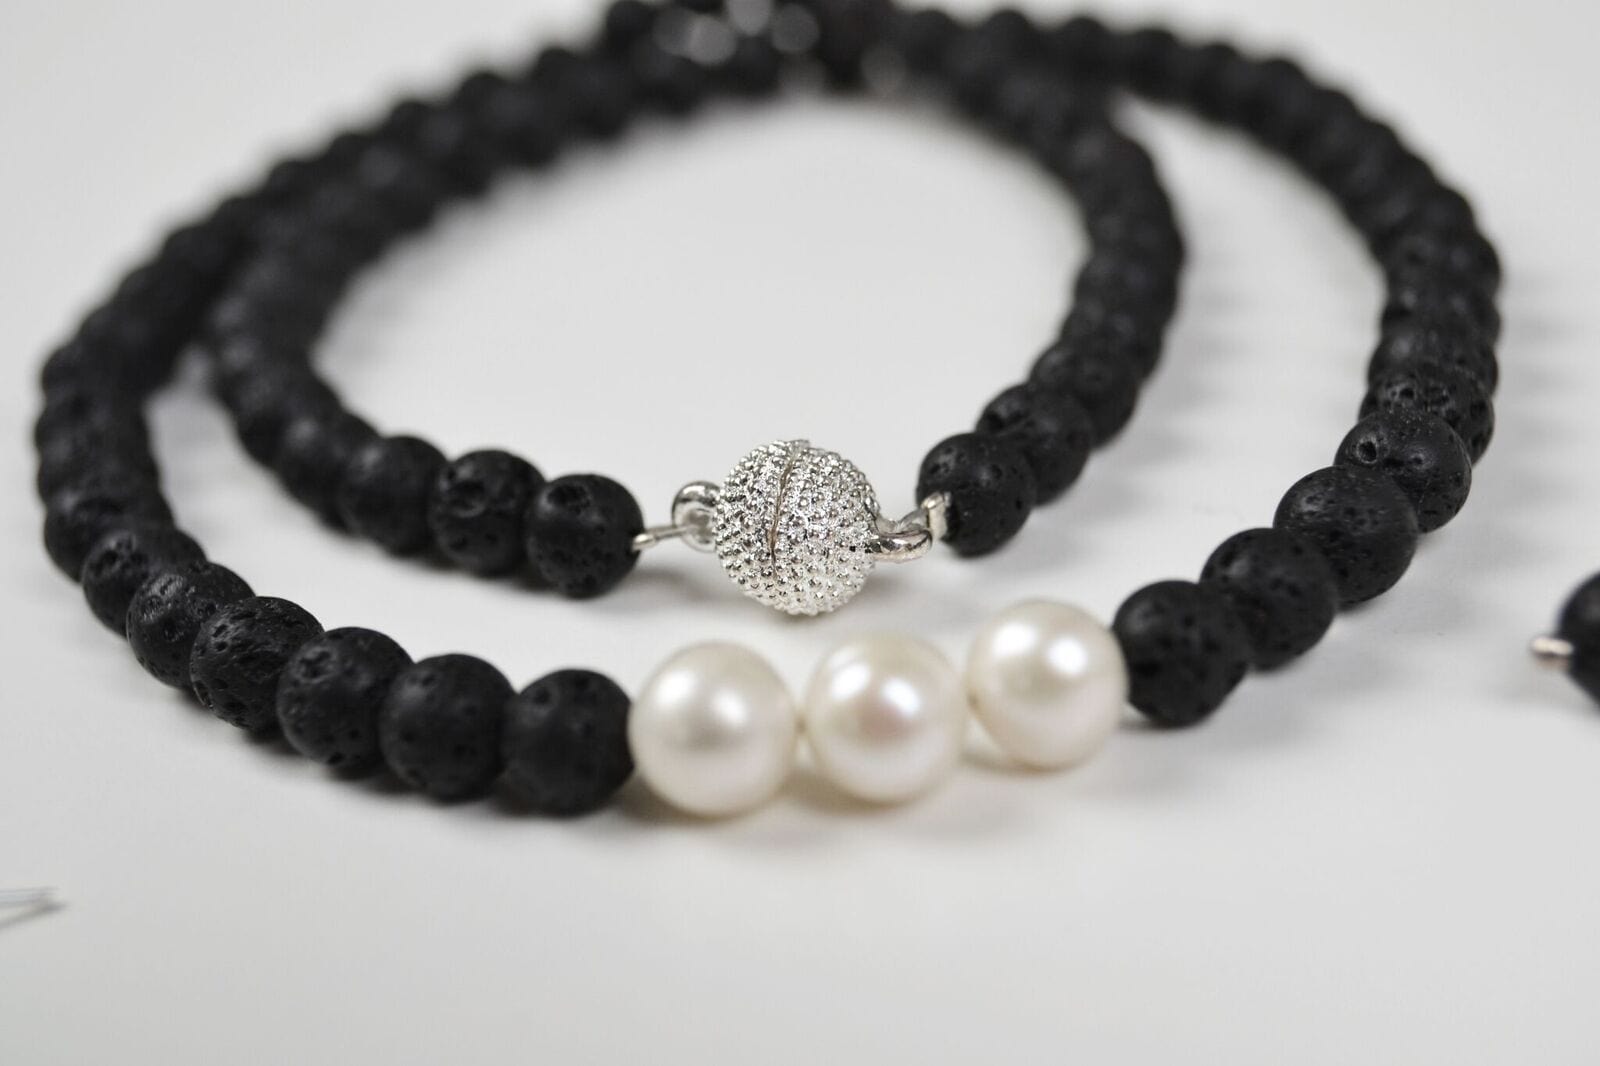 Necklace: Lava and Pearl Necklace - Precious as a Pearl